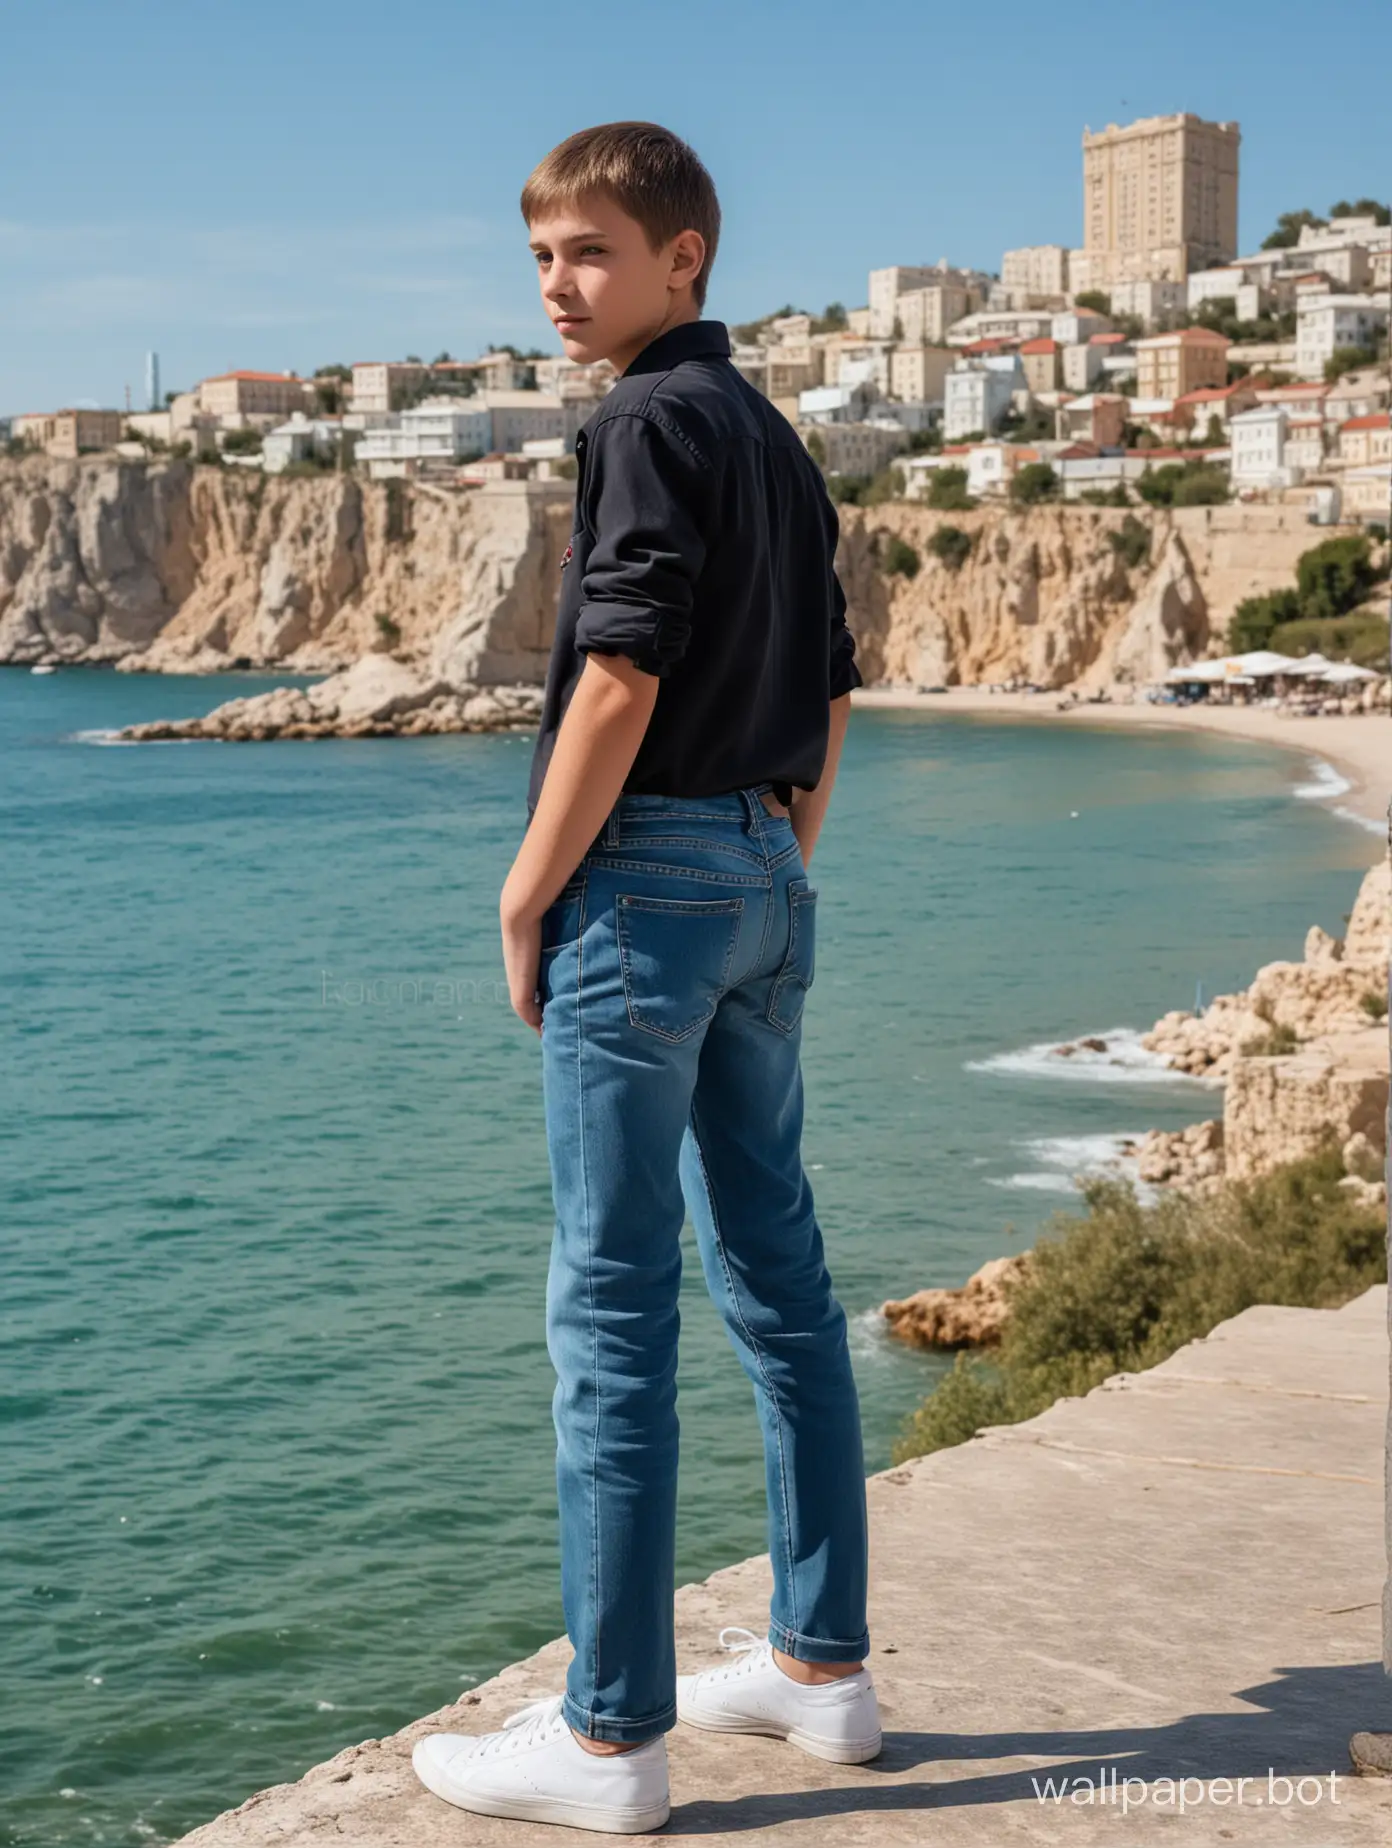 Russian schoolboy 13 years old in Crimea against the background of the sea, full height, dynamic poses, people and buildings in the background, tight jeans, ass, rear view